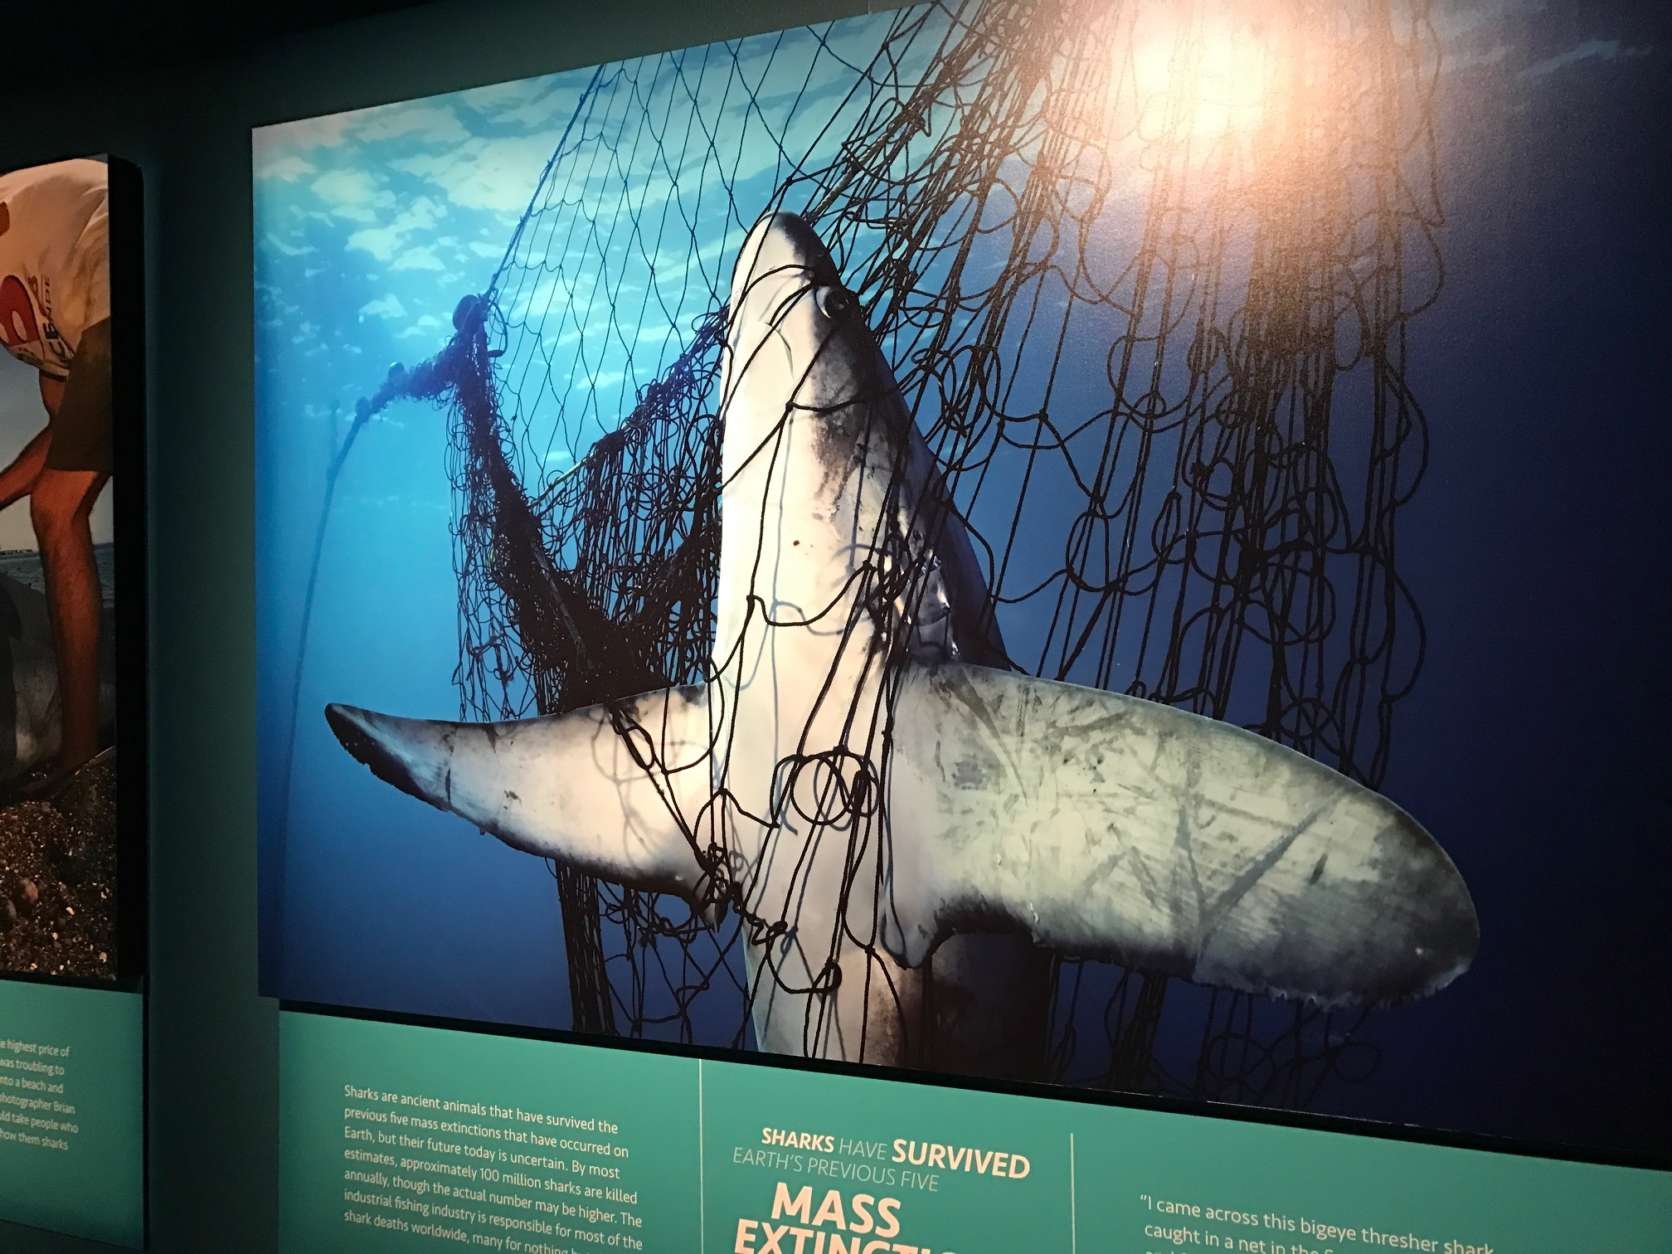 Skerry's photo of a dead shark caught in a net has garnered international acclaim for exposing the reality of the threat fishing poses to the species. (WTOP/Megan Cloherty)